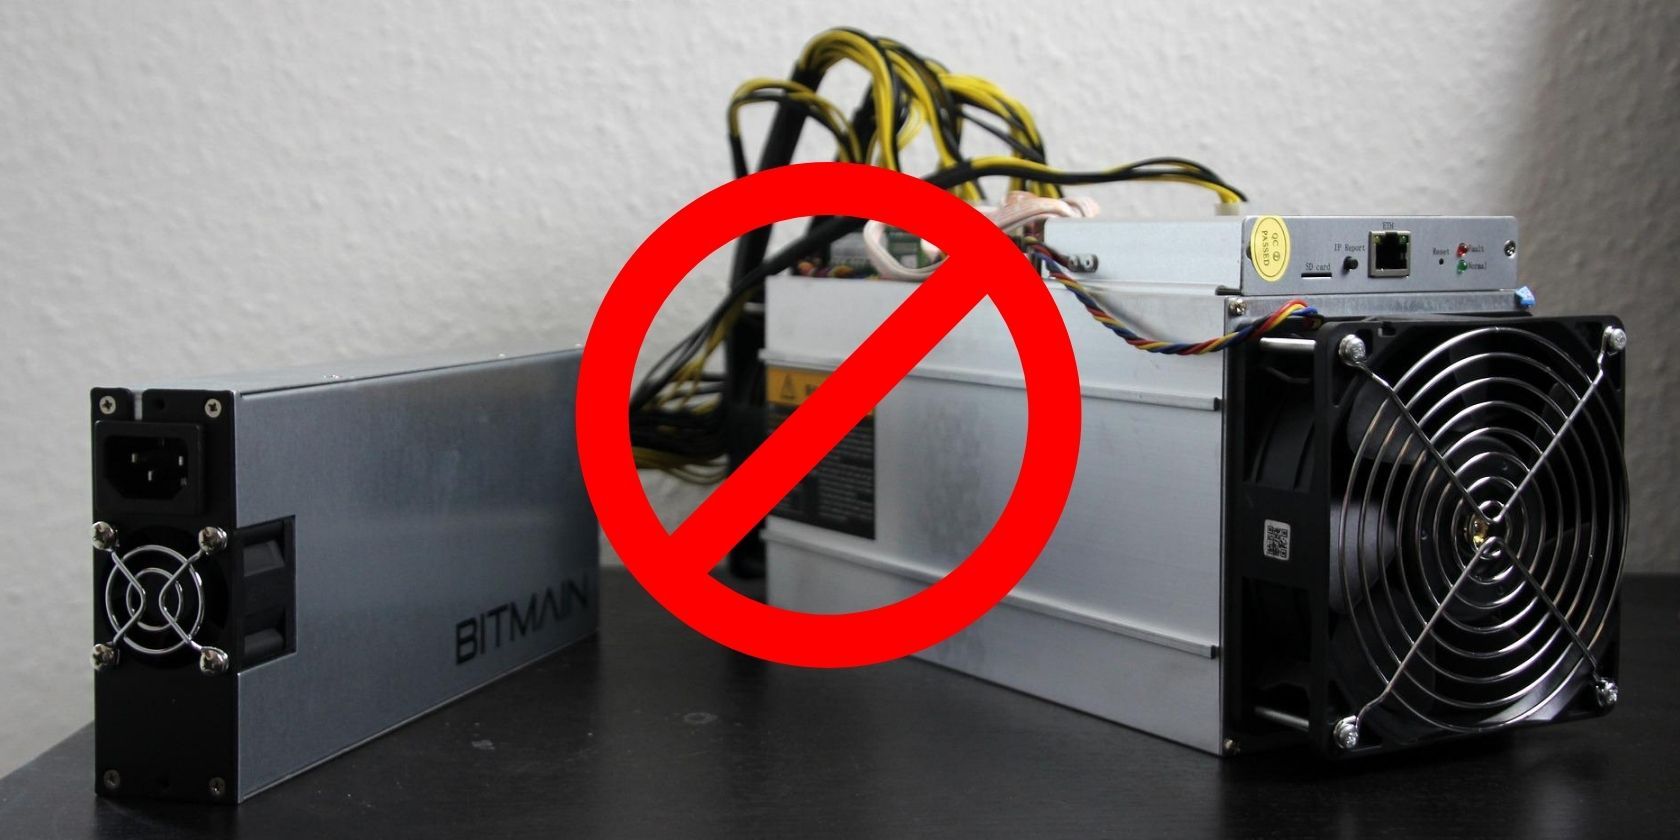 bitmain asic miner behind red restricted logo